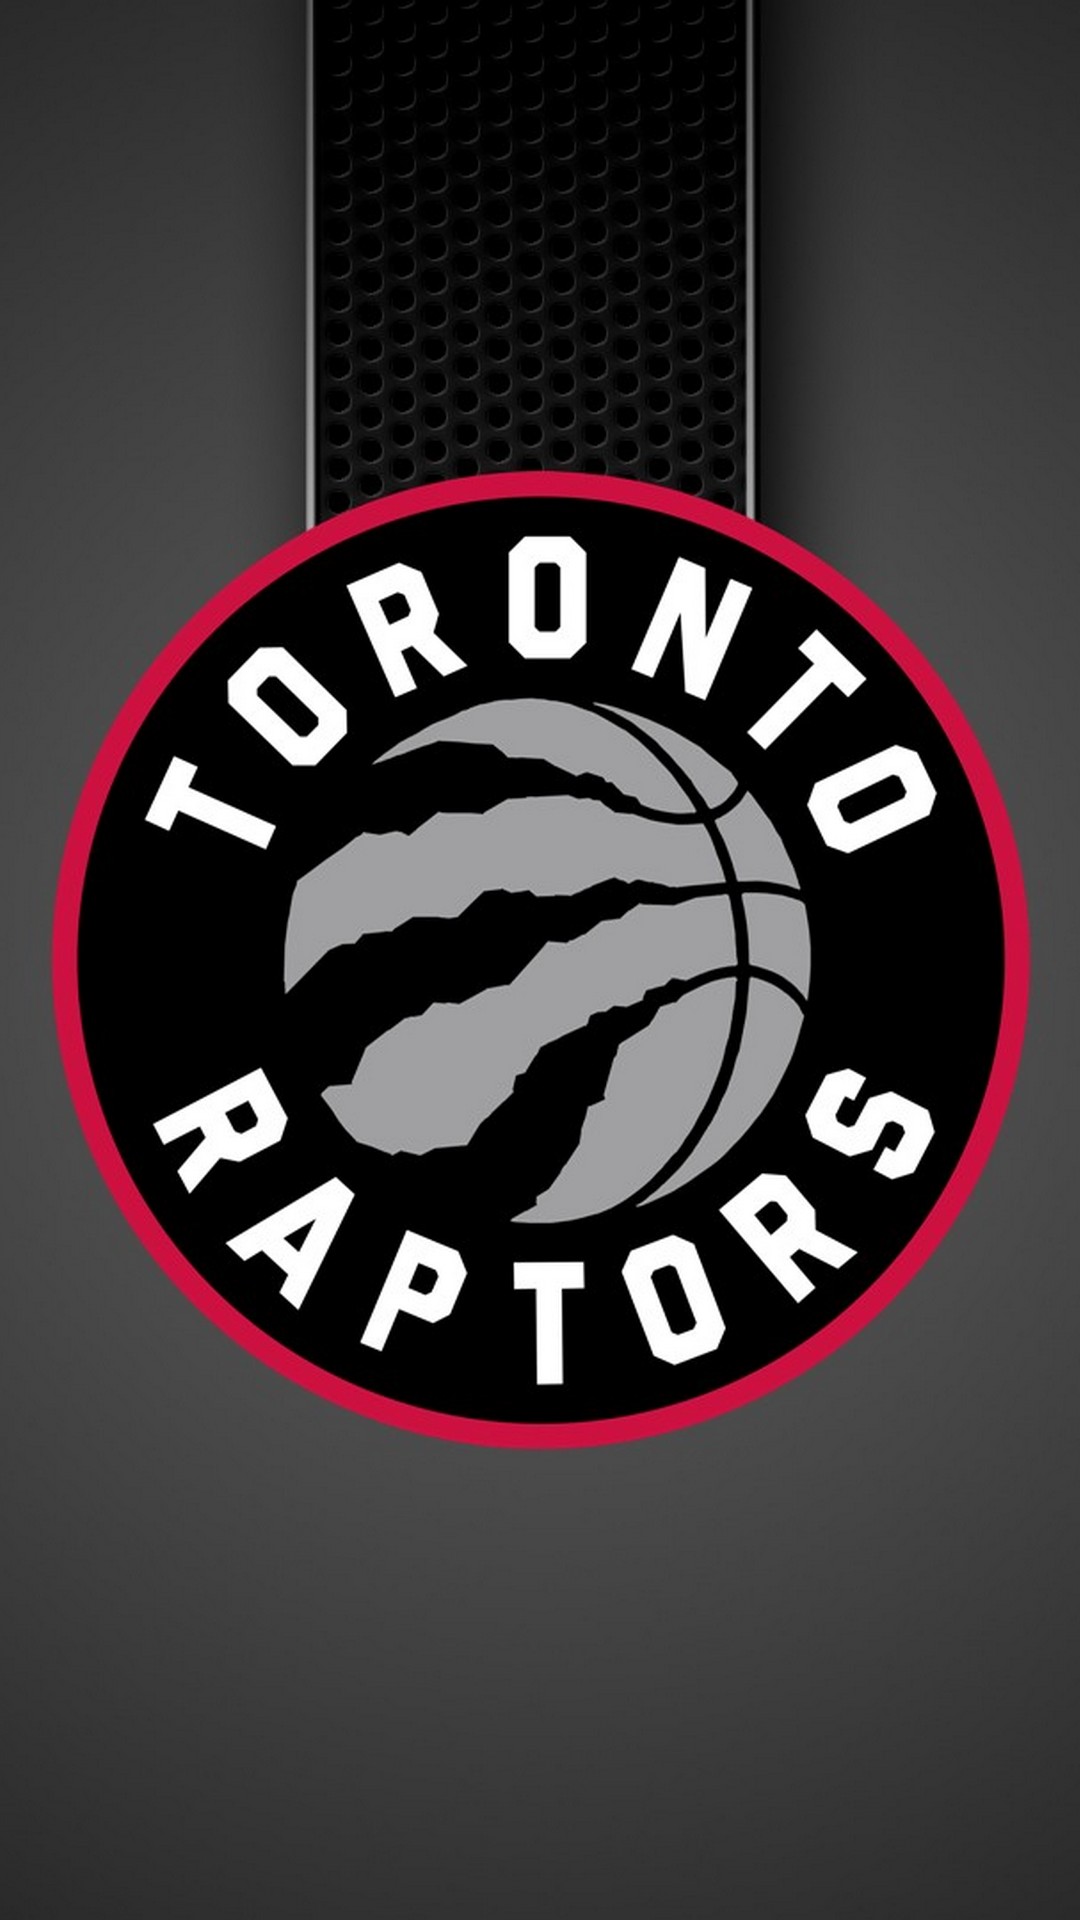 Toronto Raptors Wallpaper Android with image resolution 1080x1920 pixel. You can make this wallpaper for your Android backgrounds, Tablet, Smartphones Screensavers and Mobile Phone Lock Screen